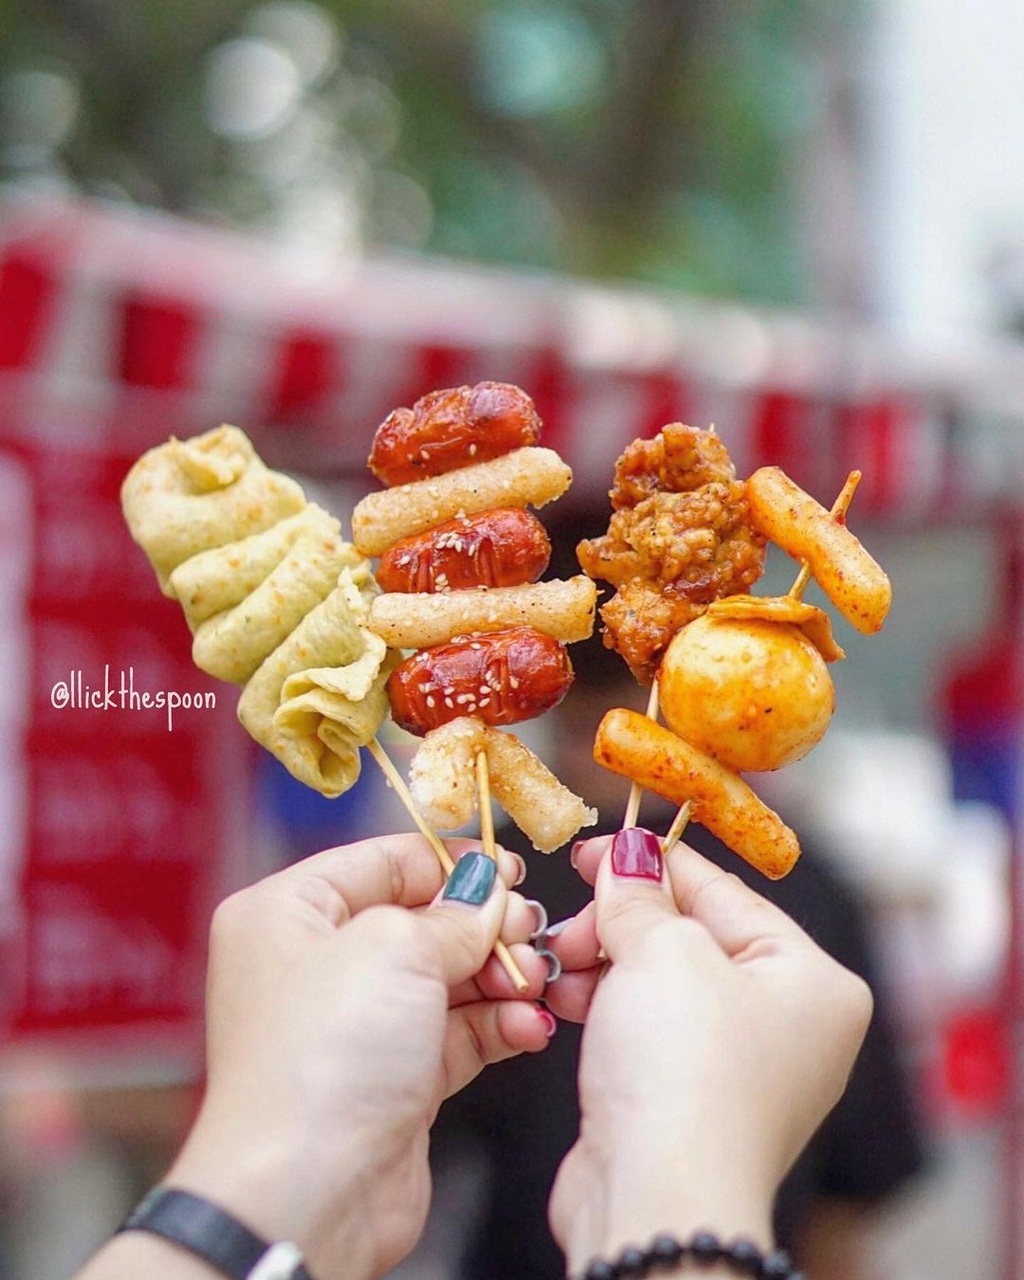 The menu includes delicacies such as tokbokki, roll vermicelli, fish balls, fried chicken balls, and sausages, with prices at around VND25,000, equivalent to US$1.08. (Photo: llickthespoon)